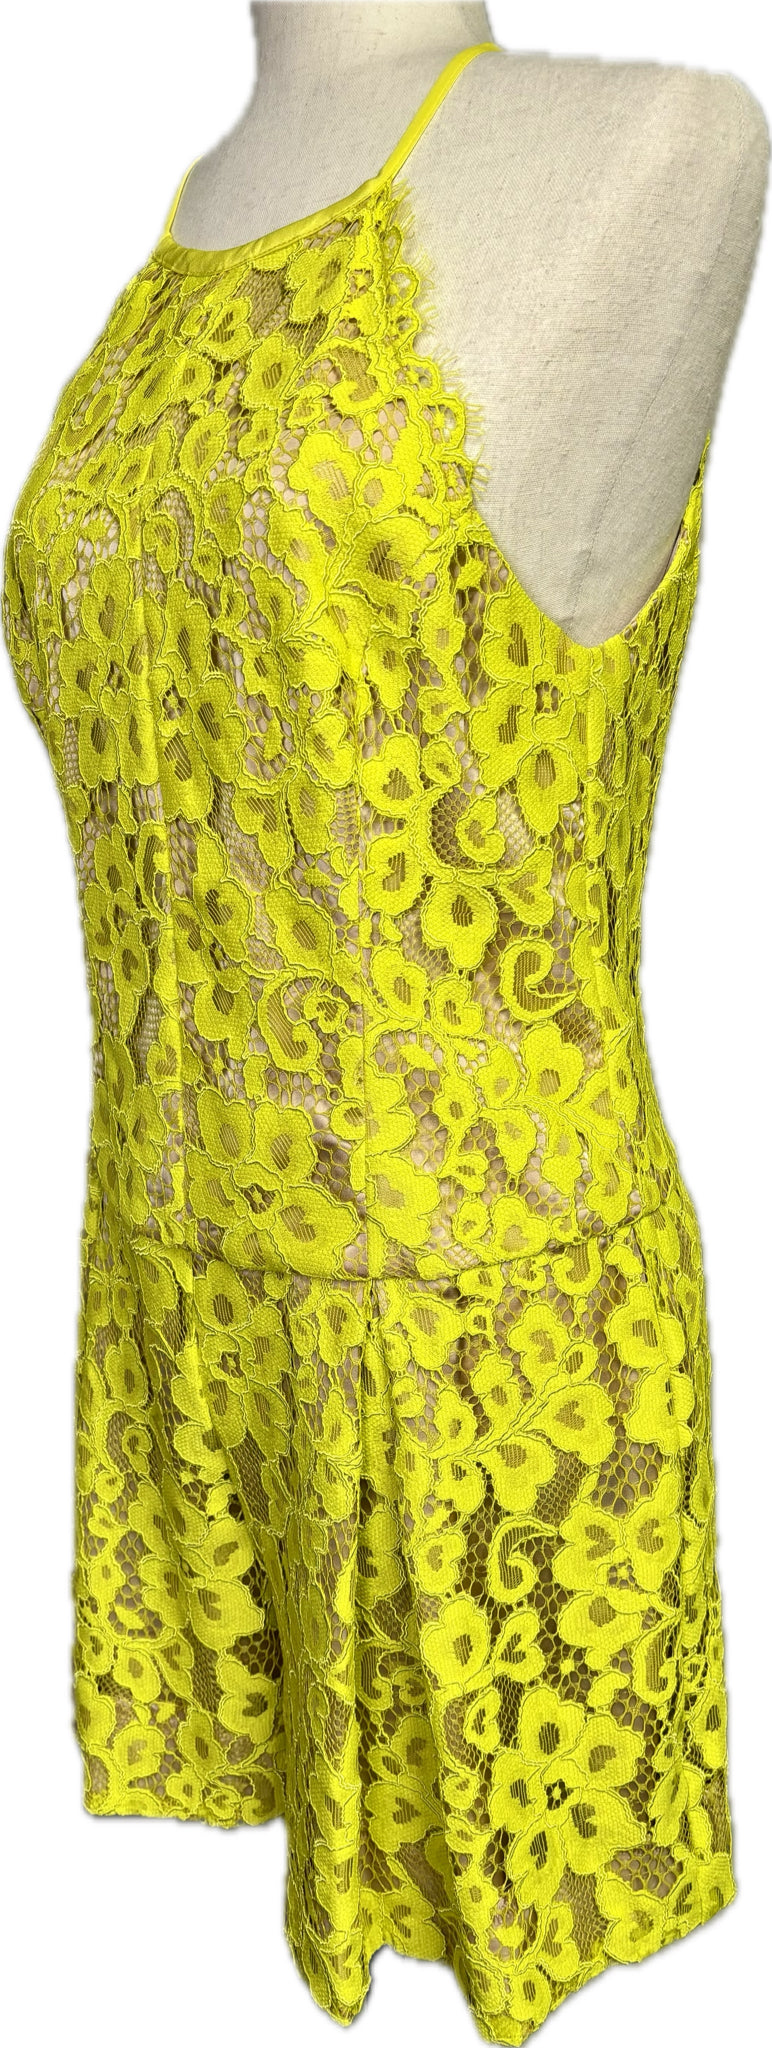 Women Size 6 Trina Turk Yellow Lace Polyester Romper/Jumpsuit